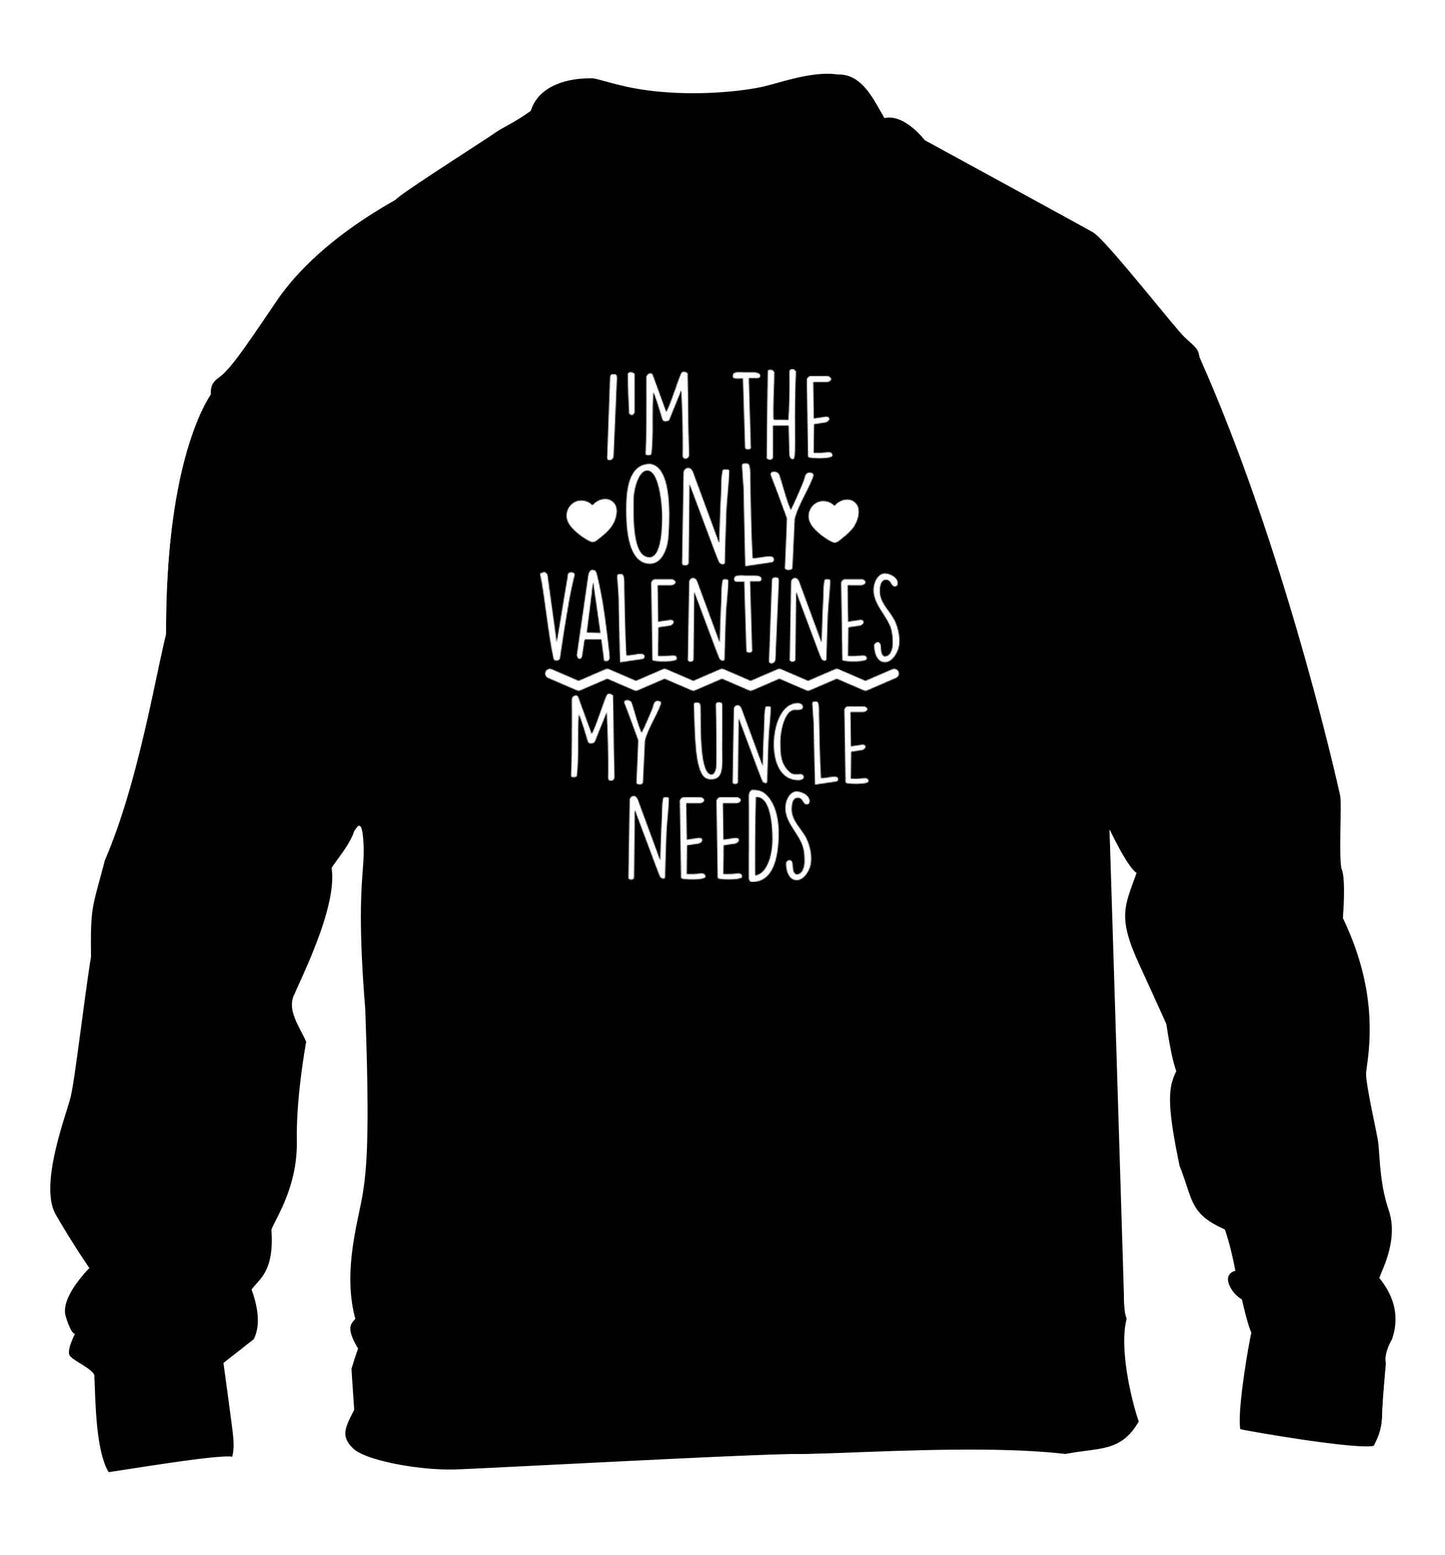 I'm the only valentines my uncle needs children's black sweater 12-13 Years